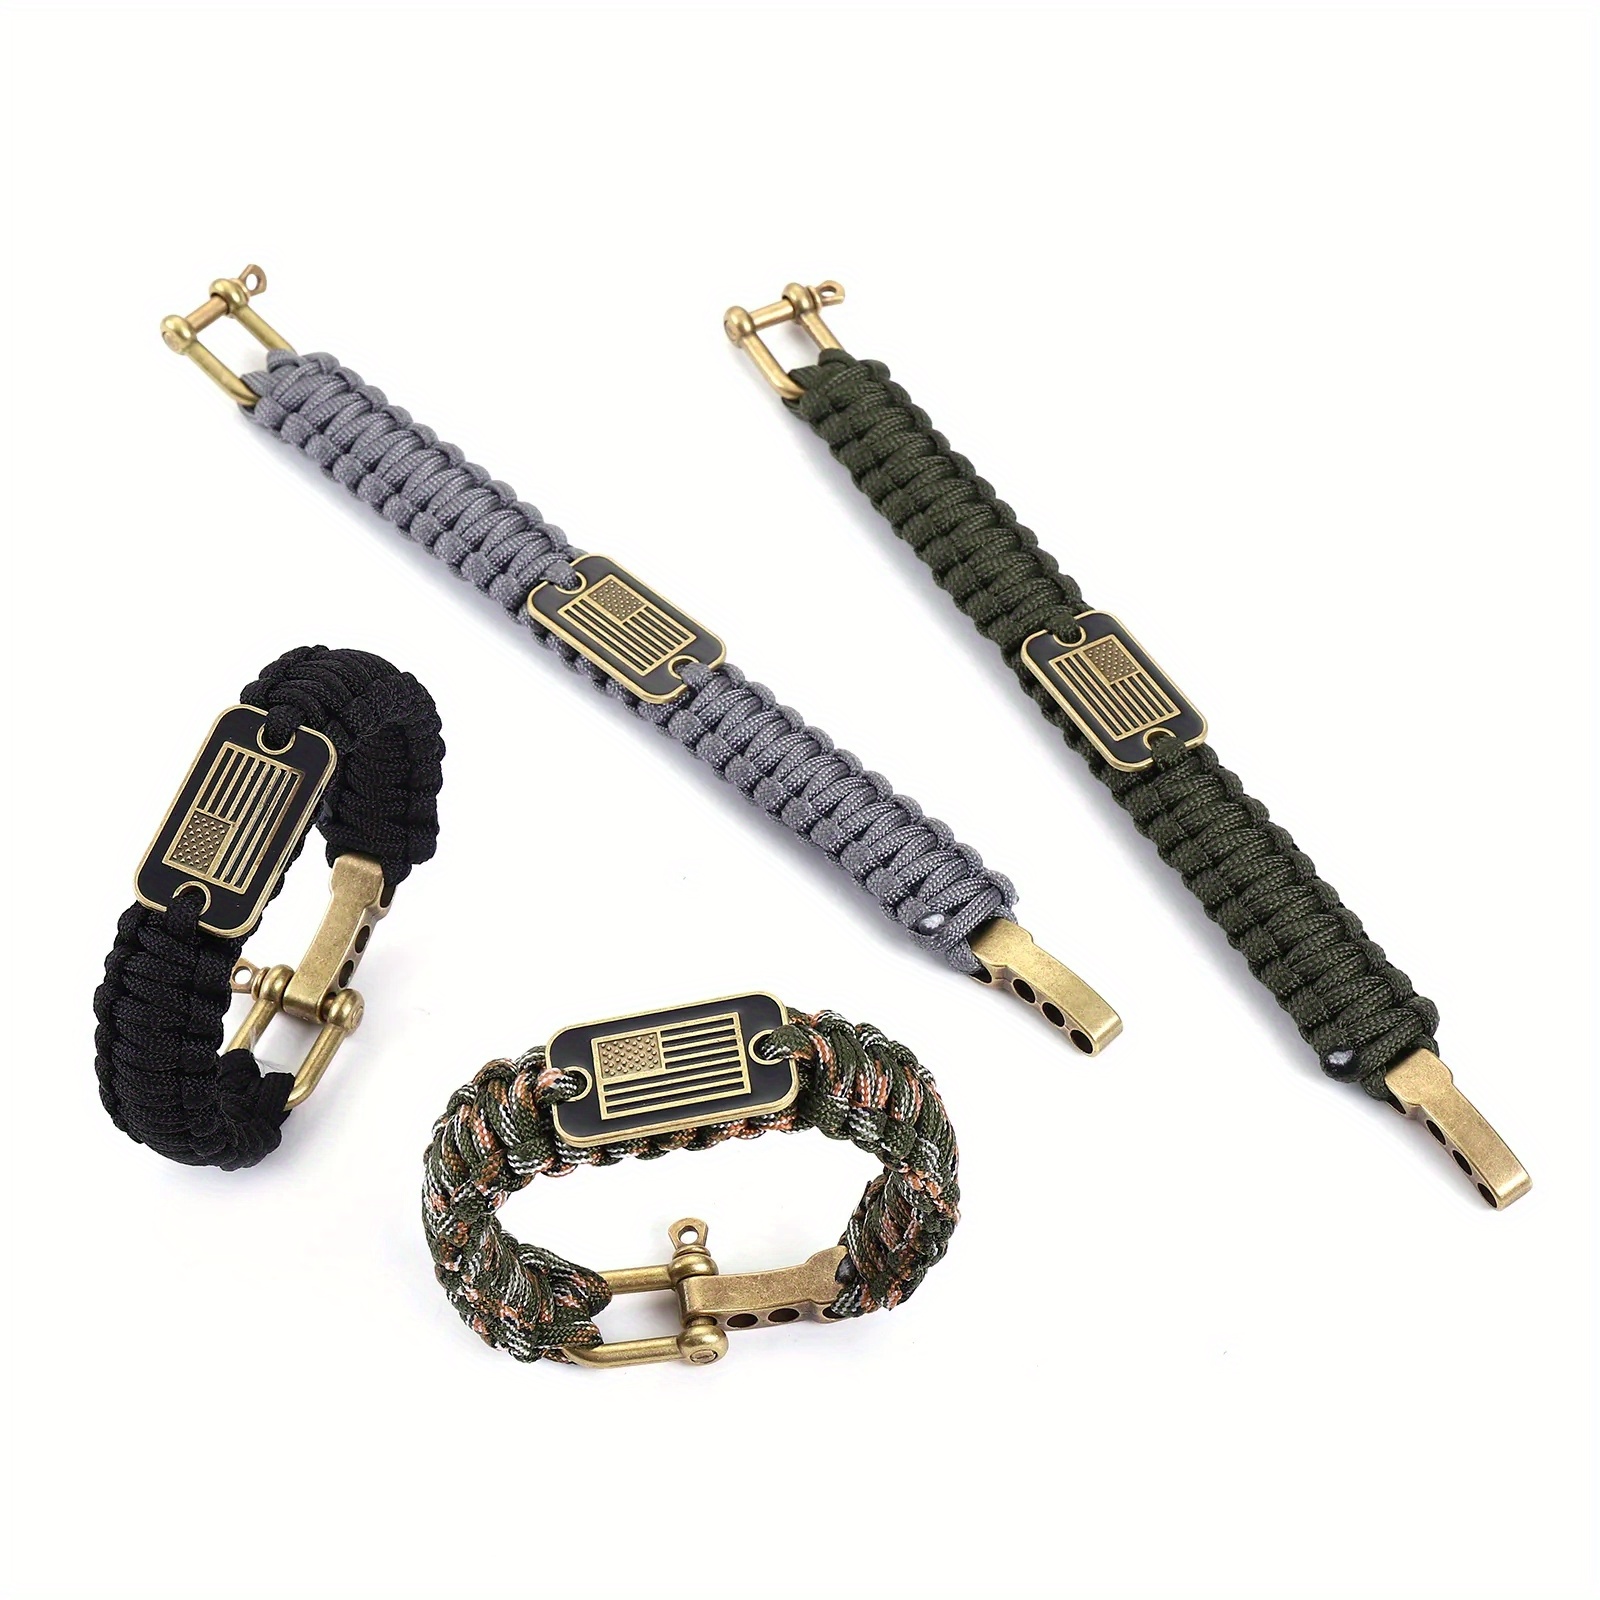 Military Paracord Bracelet Tactical Torch And Spyglass Stock Photo -  Download Image Now - iStock